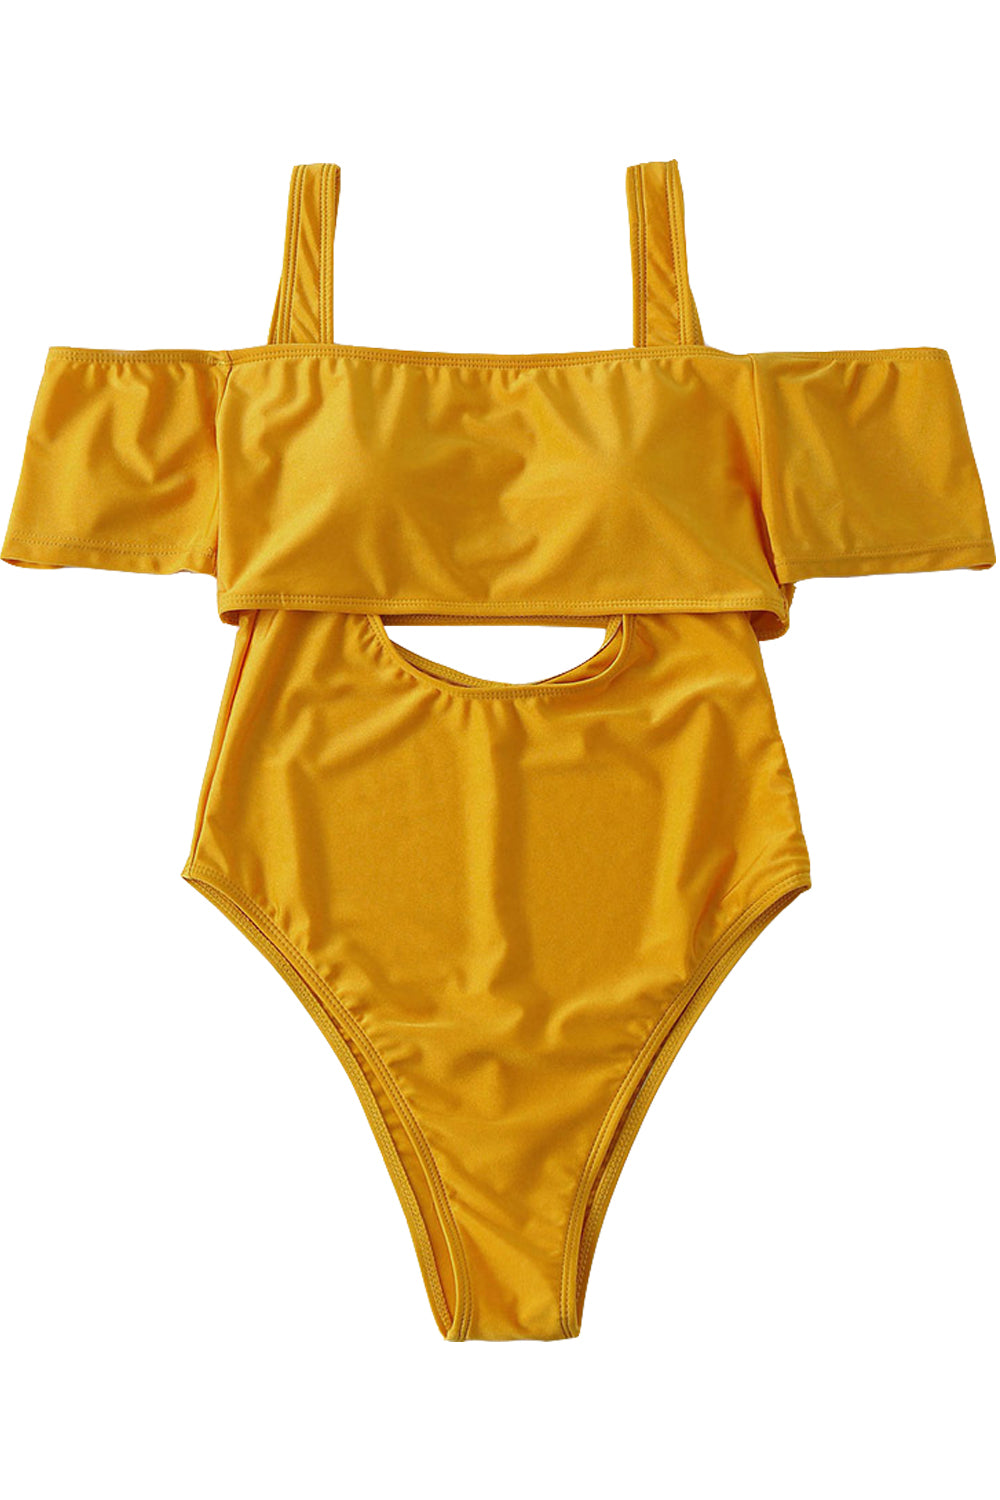 Iyasson Yellow Off-shoulder Hollow Out One-piece Swimsuit